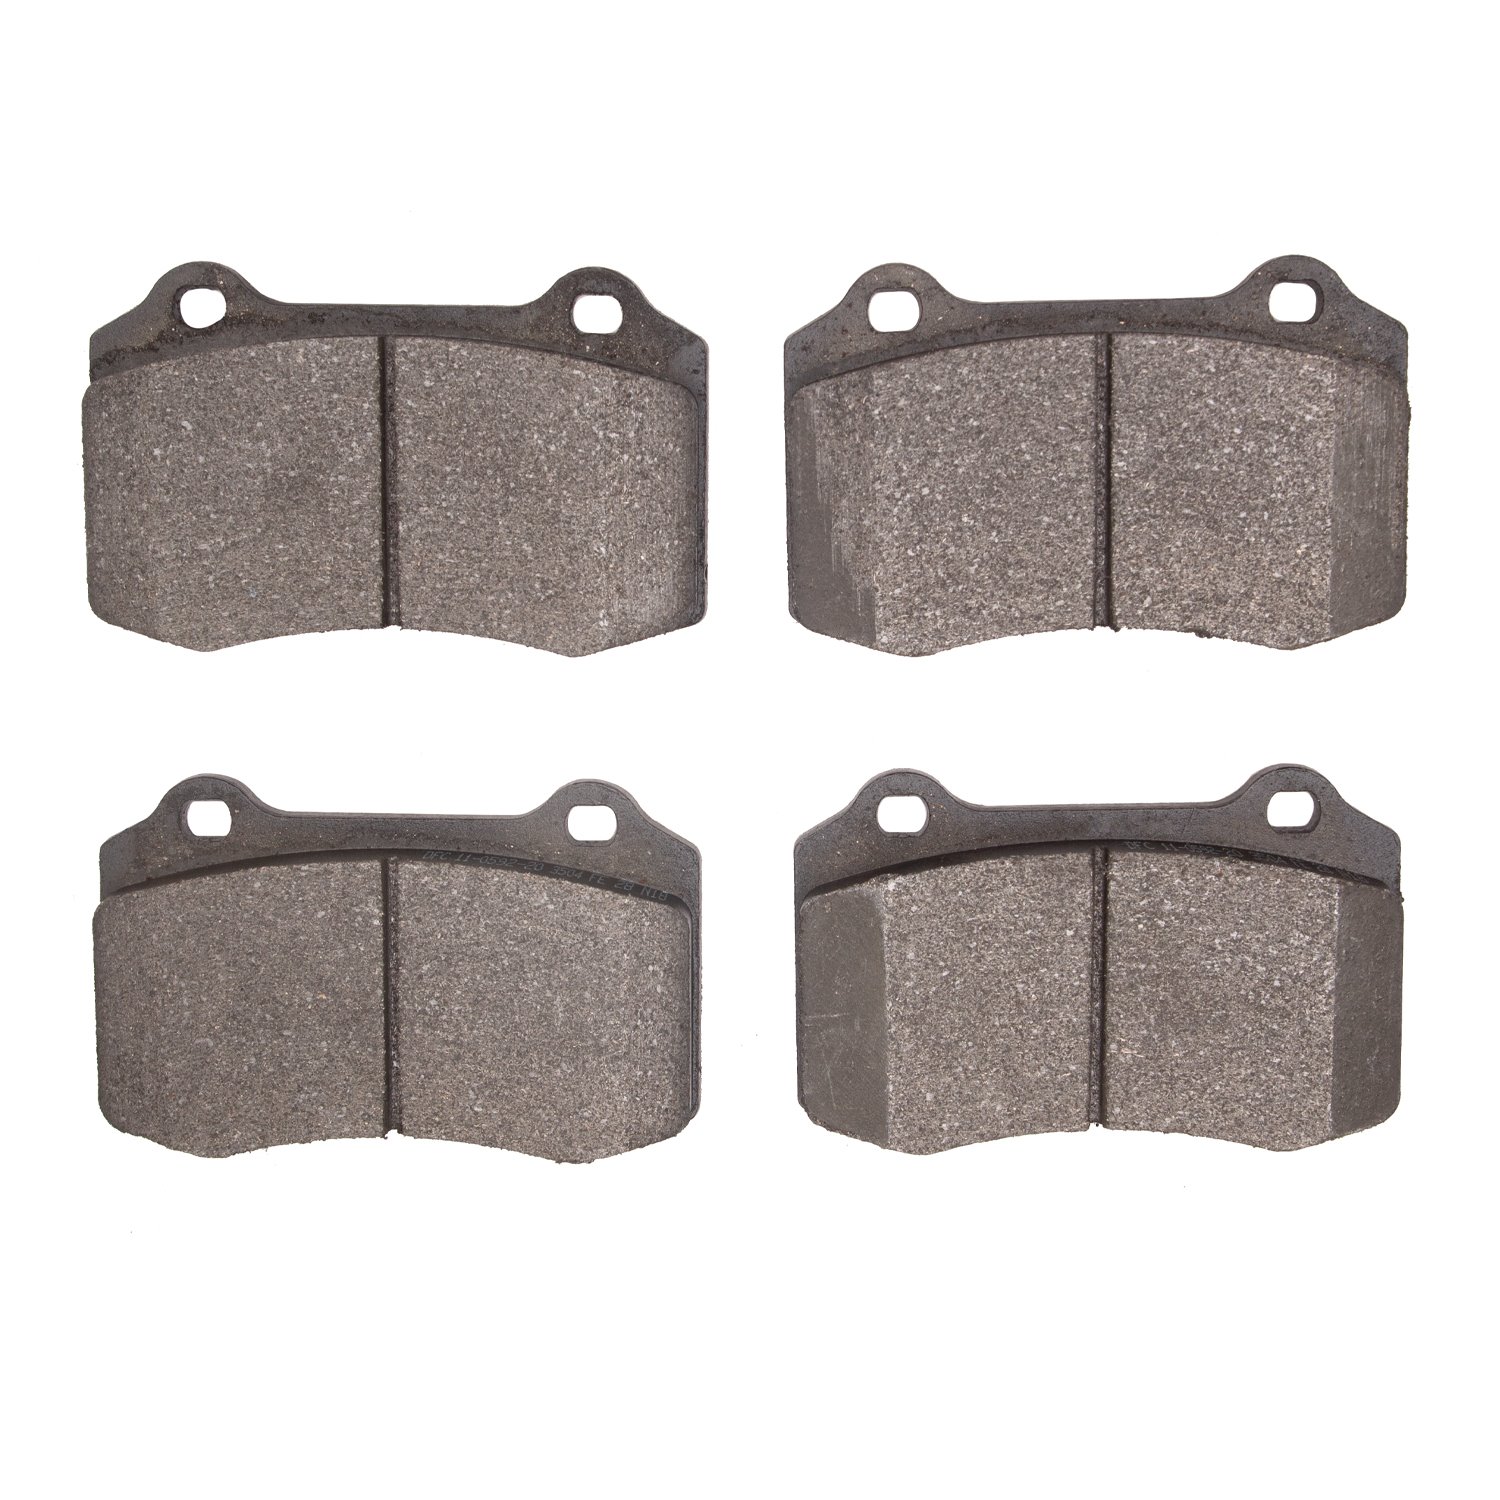 1551-0592-00 5000 Advanced Low-Metallic Brake Pads, 1992-2006 Multiple Makes/Models, Position: Rear,Front